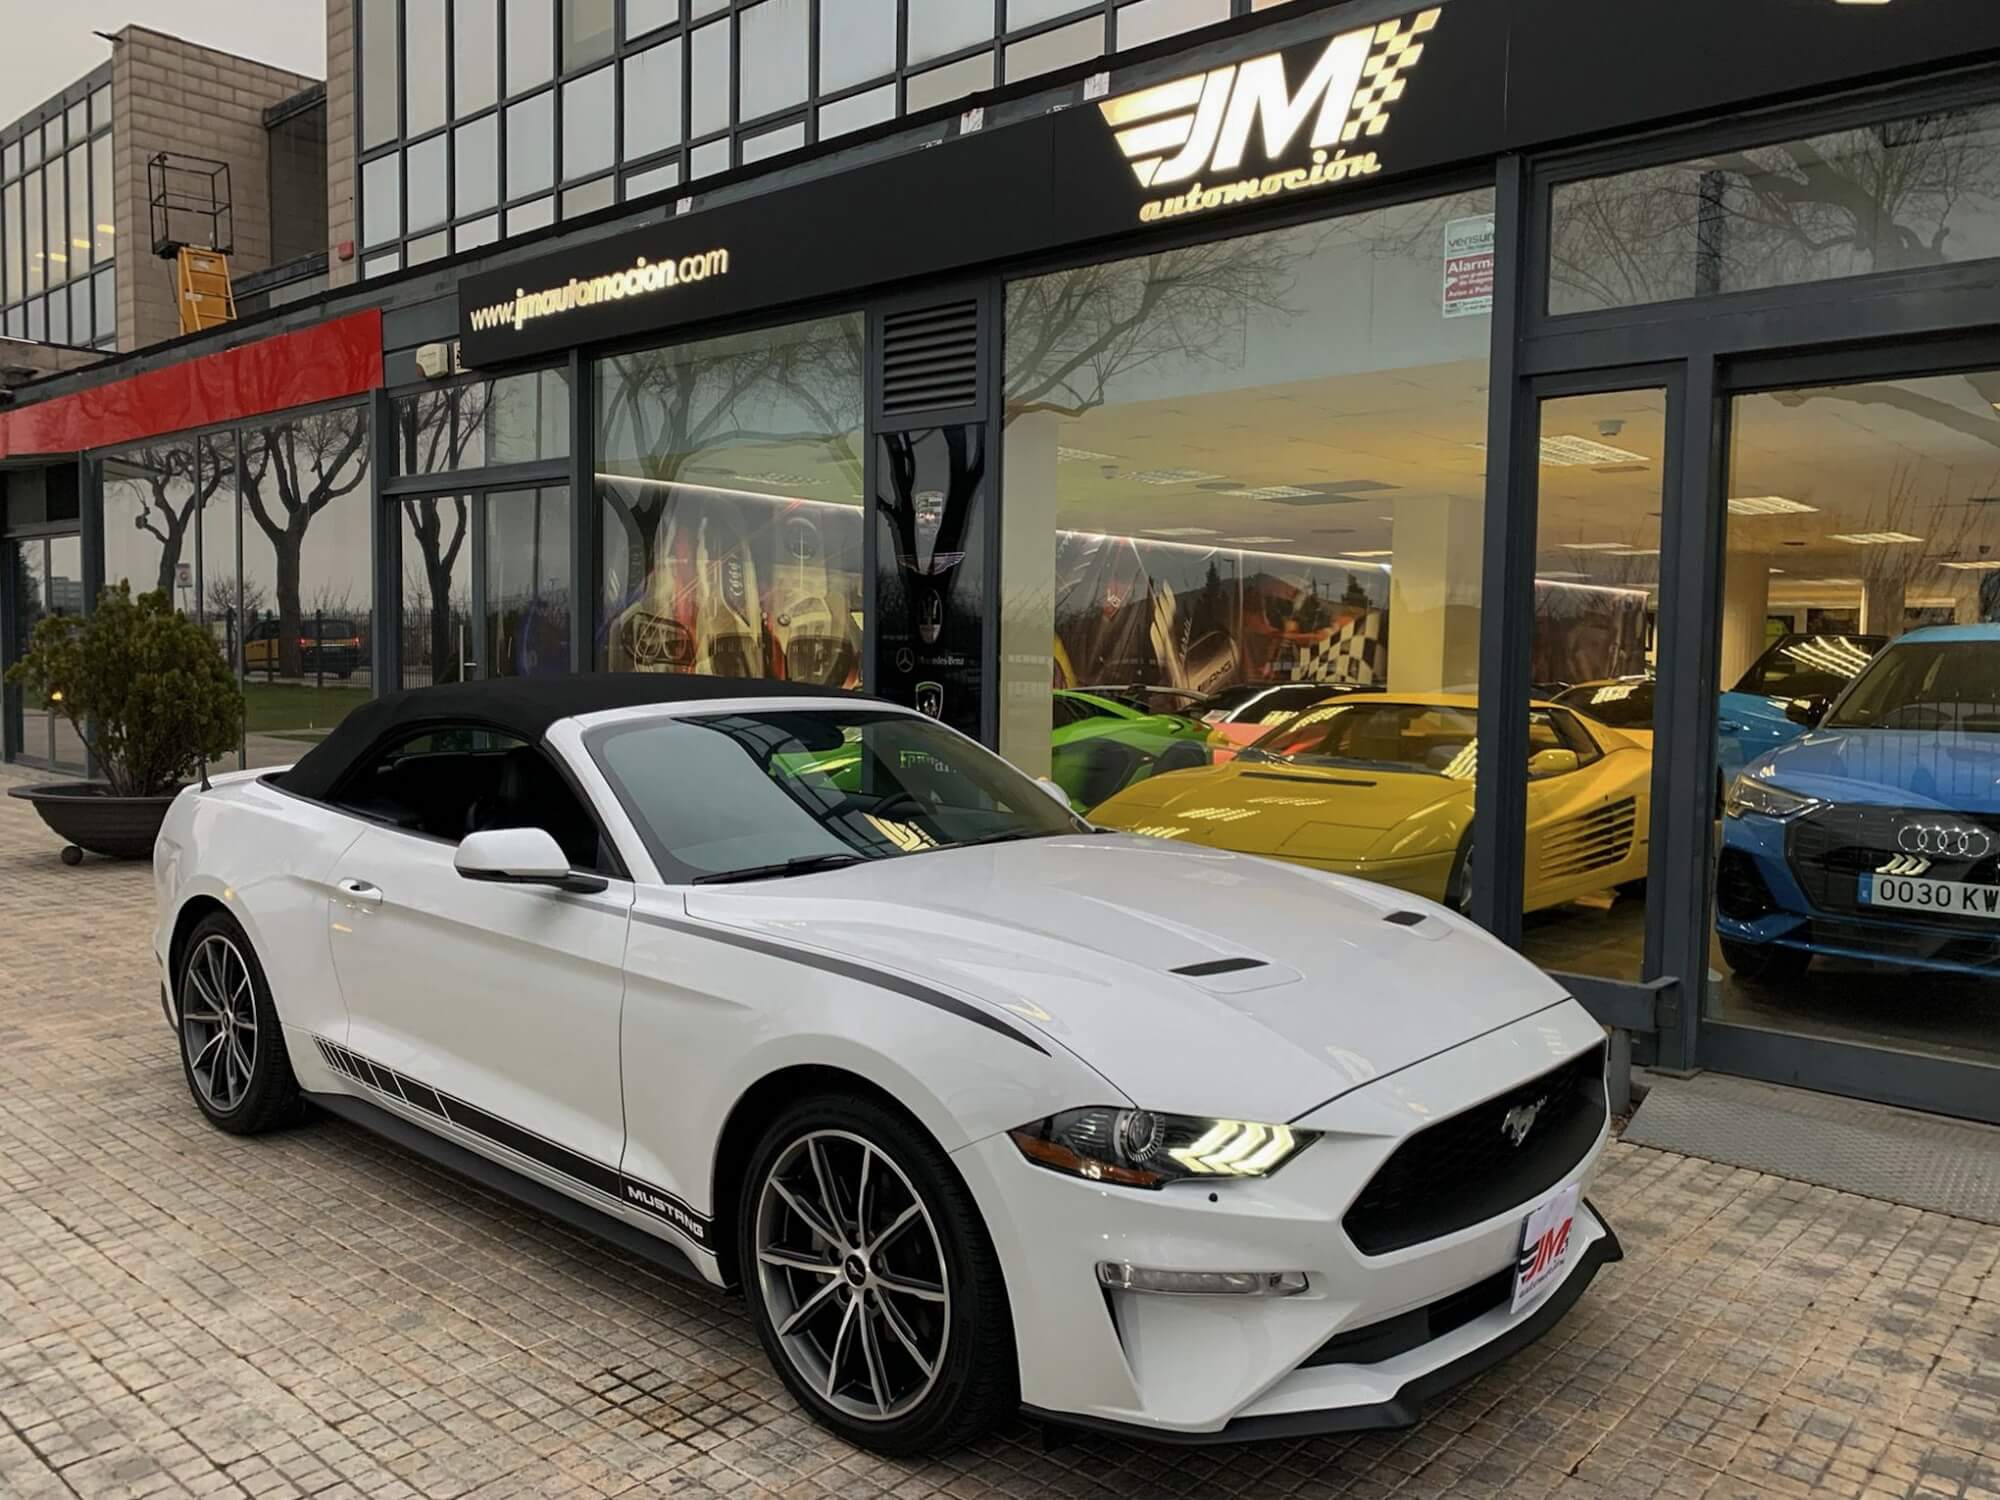 FORD MUSTANG CABRIO AUT. ECOBOOST -REESTRENO-